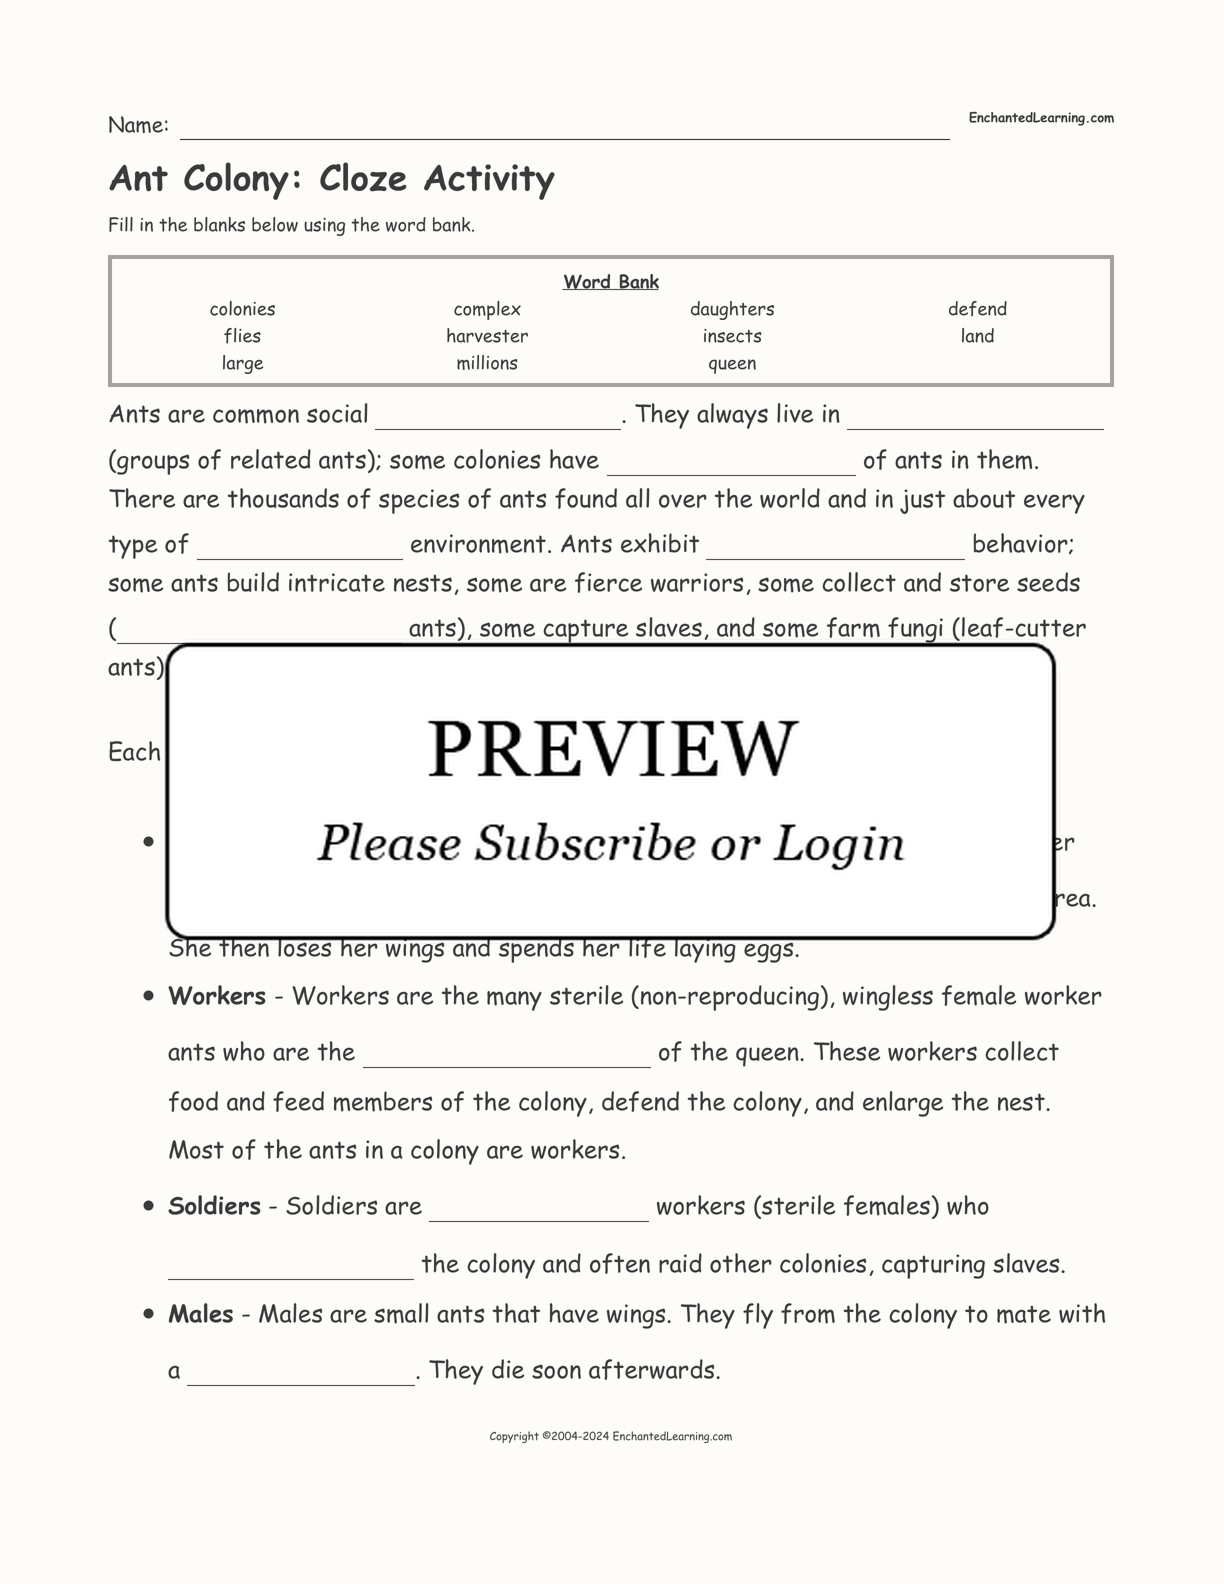 Ant Colony: Cloze Activity interactive worksheet page 1